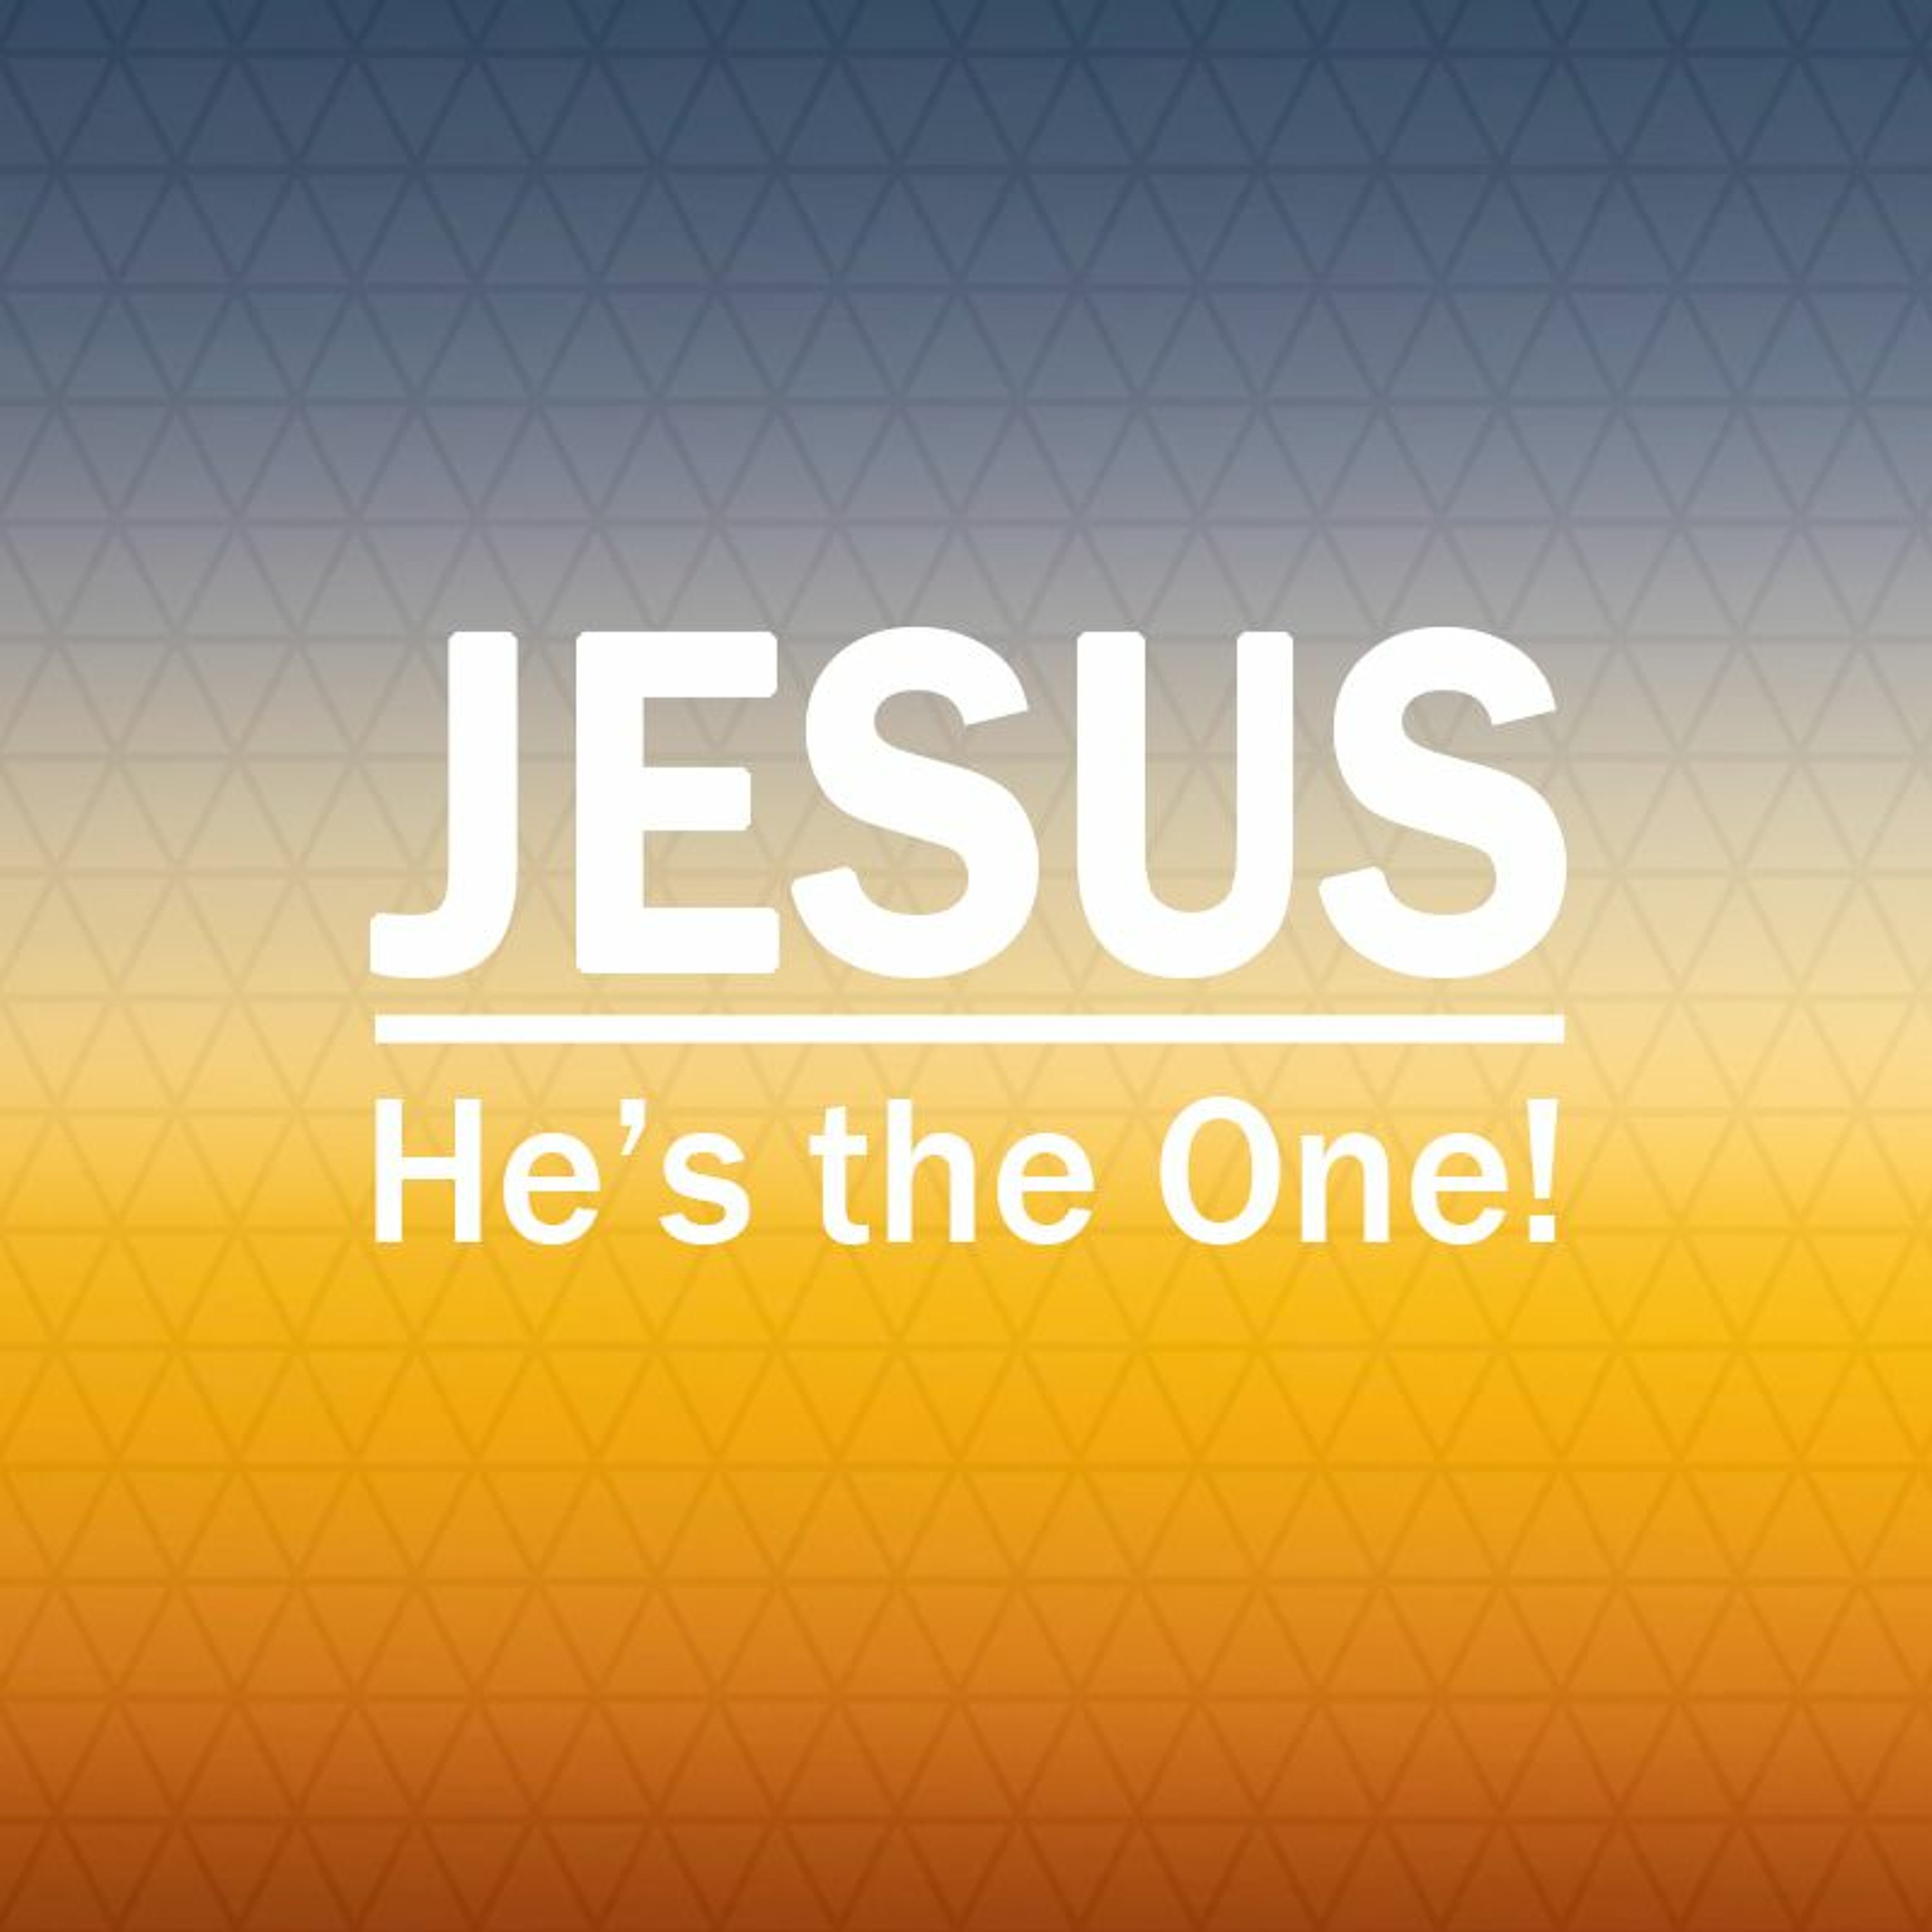 Jesus - He’s the One! | The One who comes